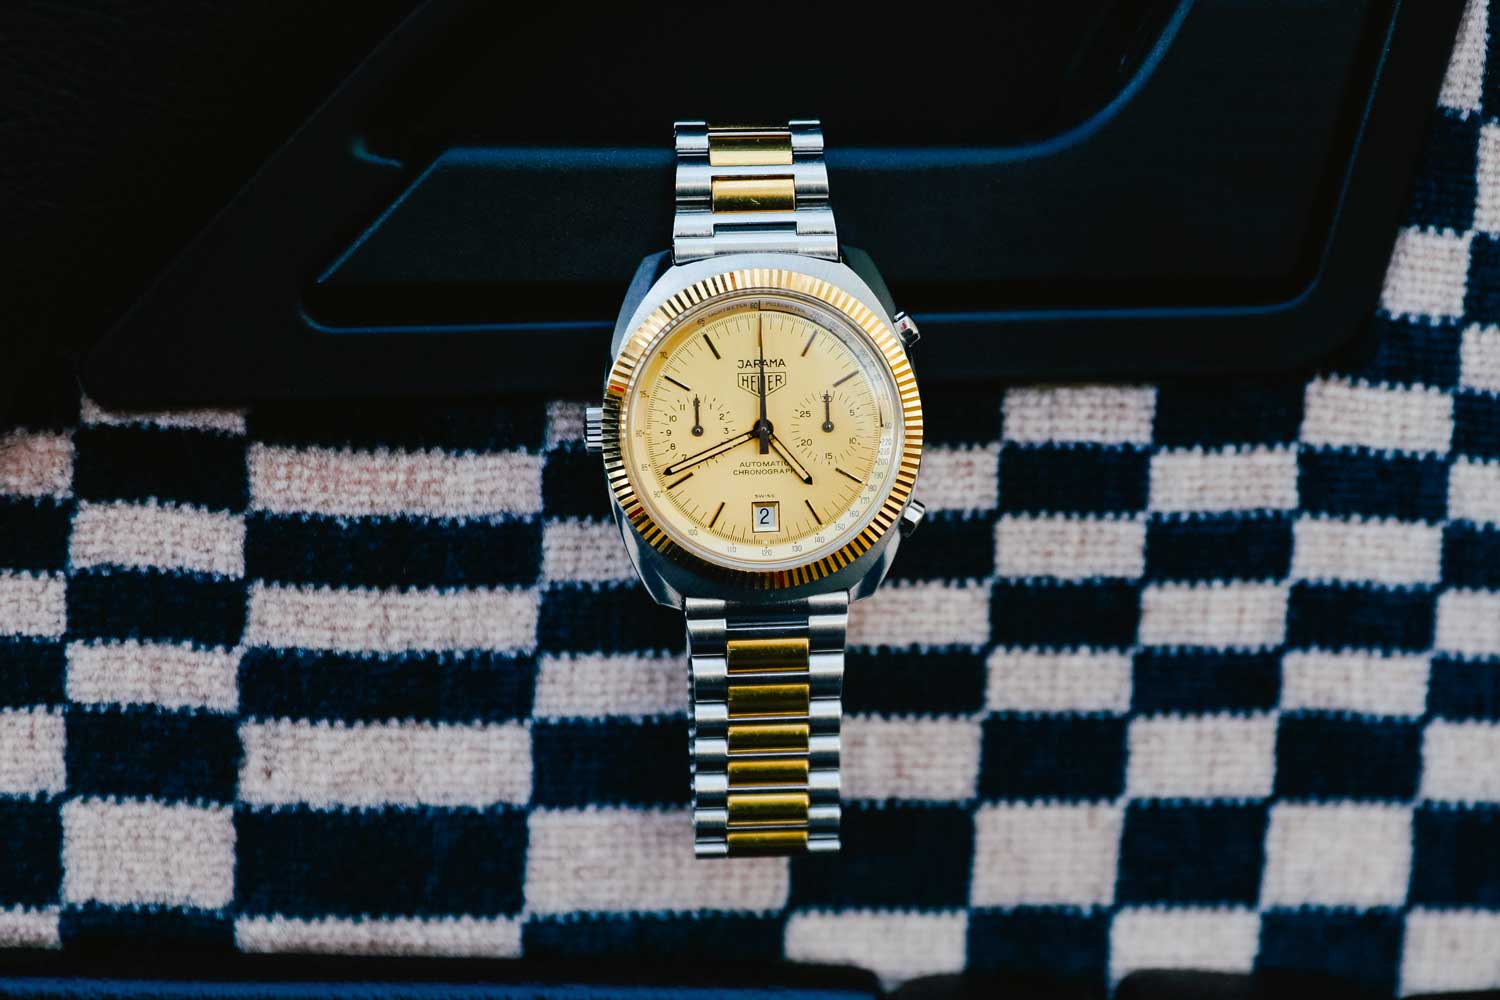 Heuer Jarama 110.225 with stainless steel case and gold fluted bezel. The 1974 Spanish Grand Prix at Jarama was the first victory for Ferrari 312B and Niki Lauda under Heuer sponsorship